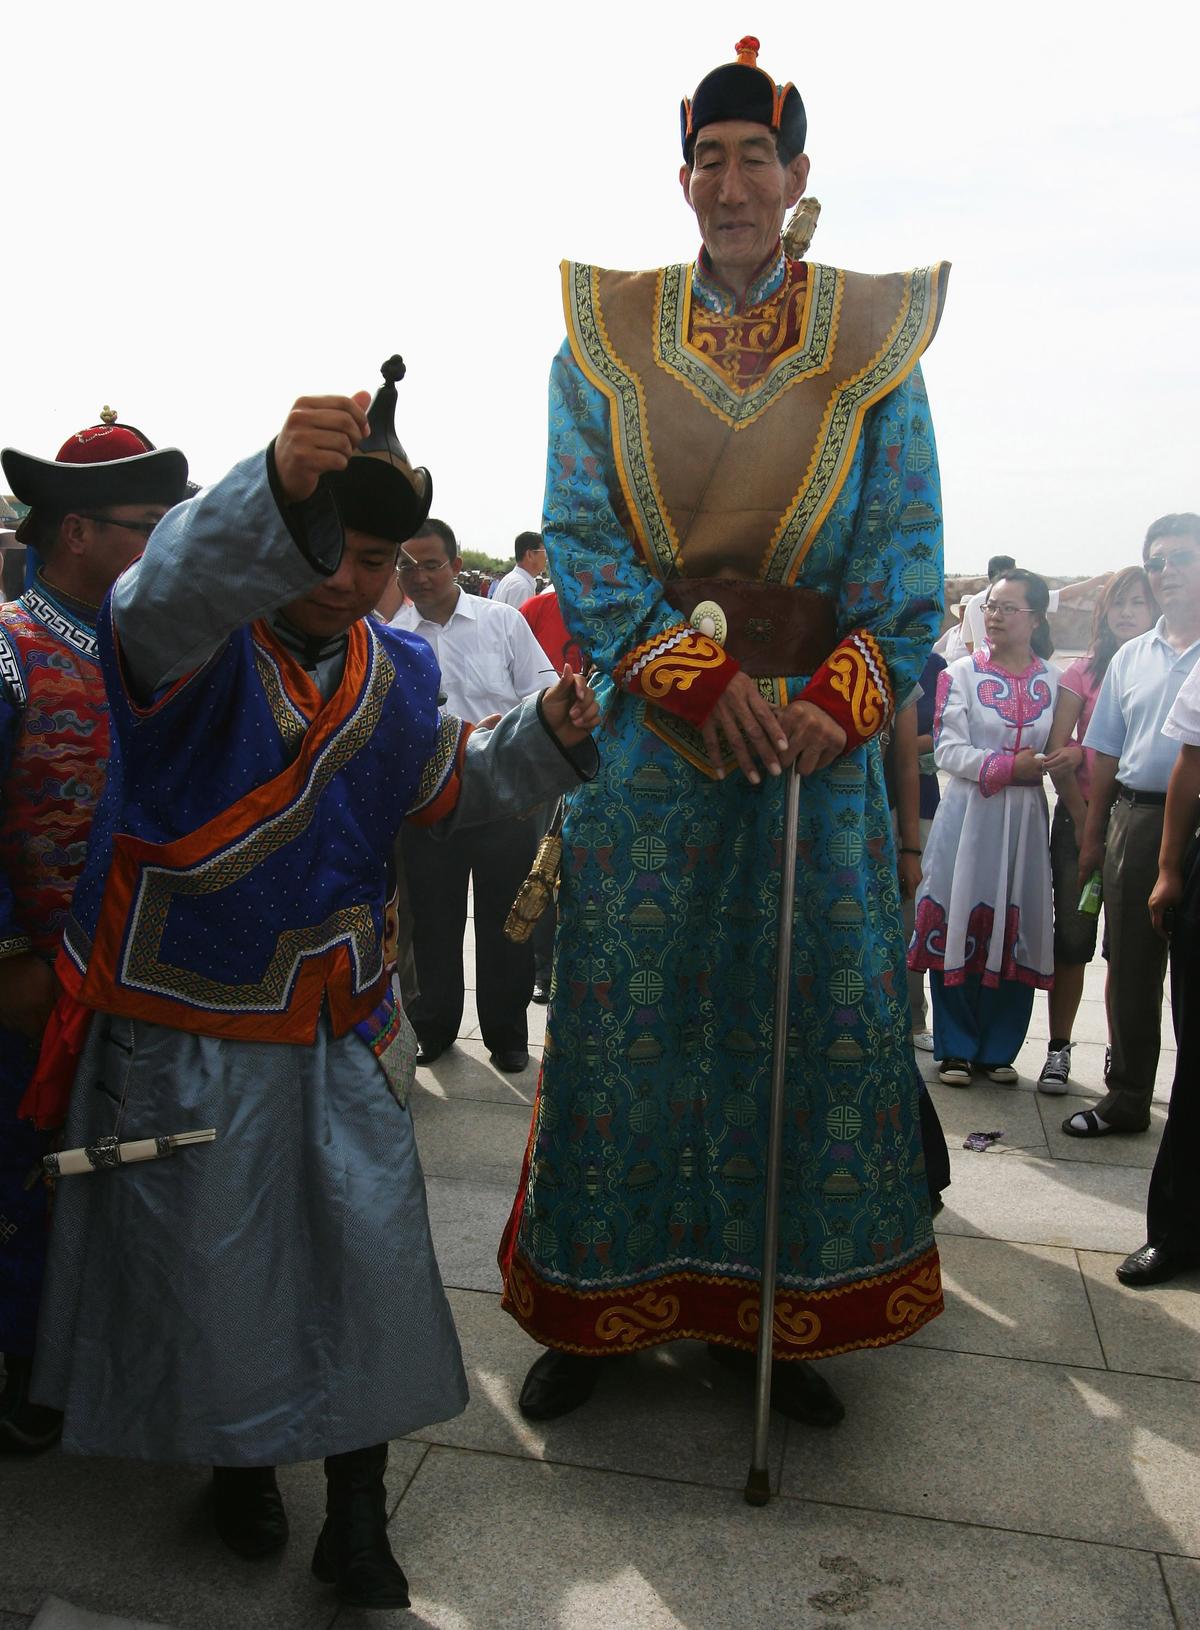 Formerly the world's tallest man, Bao Xishun (R) takes part in a traditional Mongolian wedding ceremony at the Genghis Khans Mausoleum Tourist District July 12, 2007, on the outskirt of Erdos city of Inner Mongolia Autonomous Region, China. (Guang Niu/Getty Images)